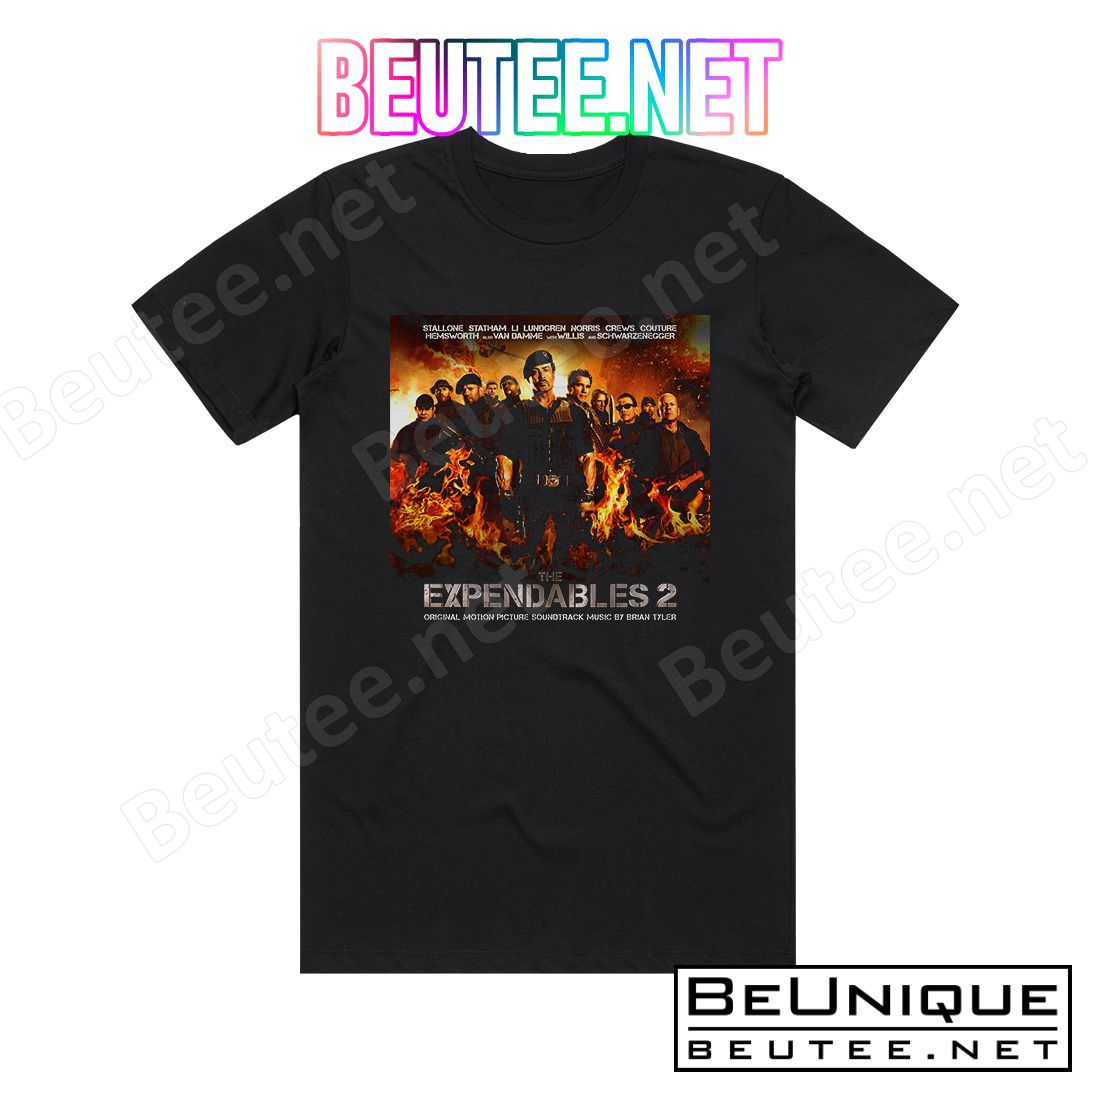 Brian Tyler The Expendables 2 Album Cover T-Shirt